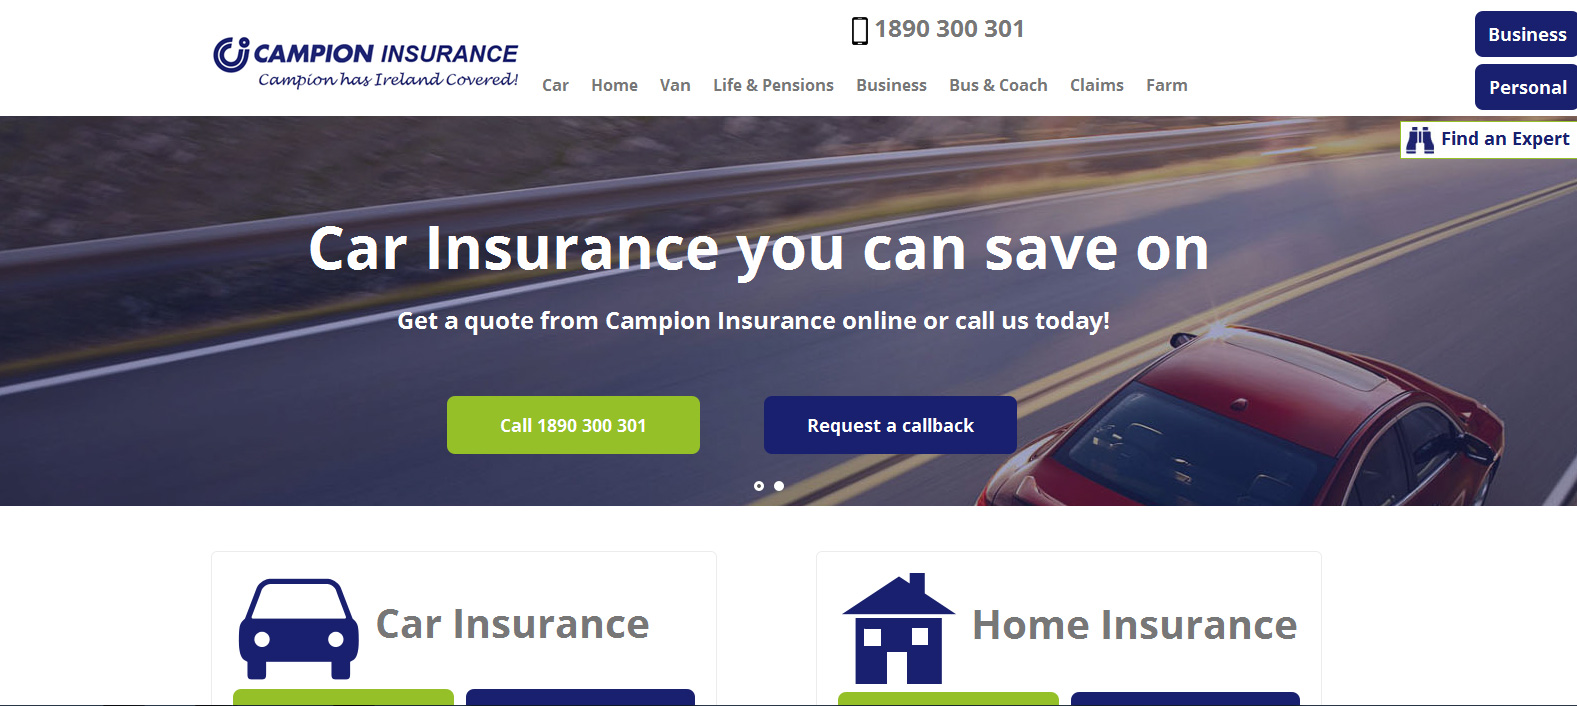 Campion Insurance Responsive Redesign